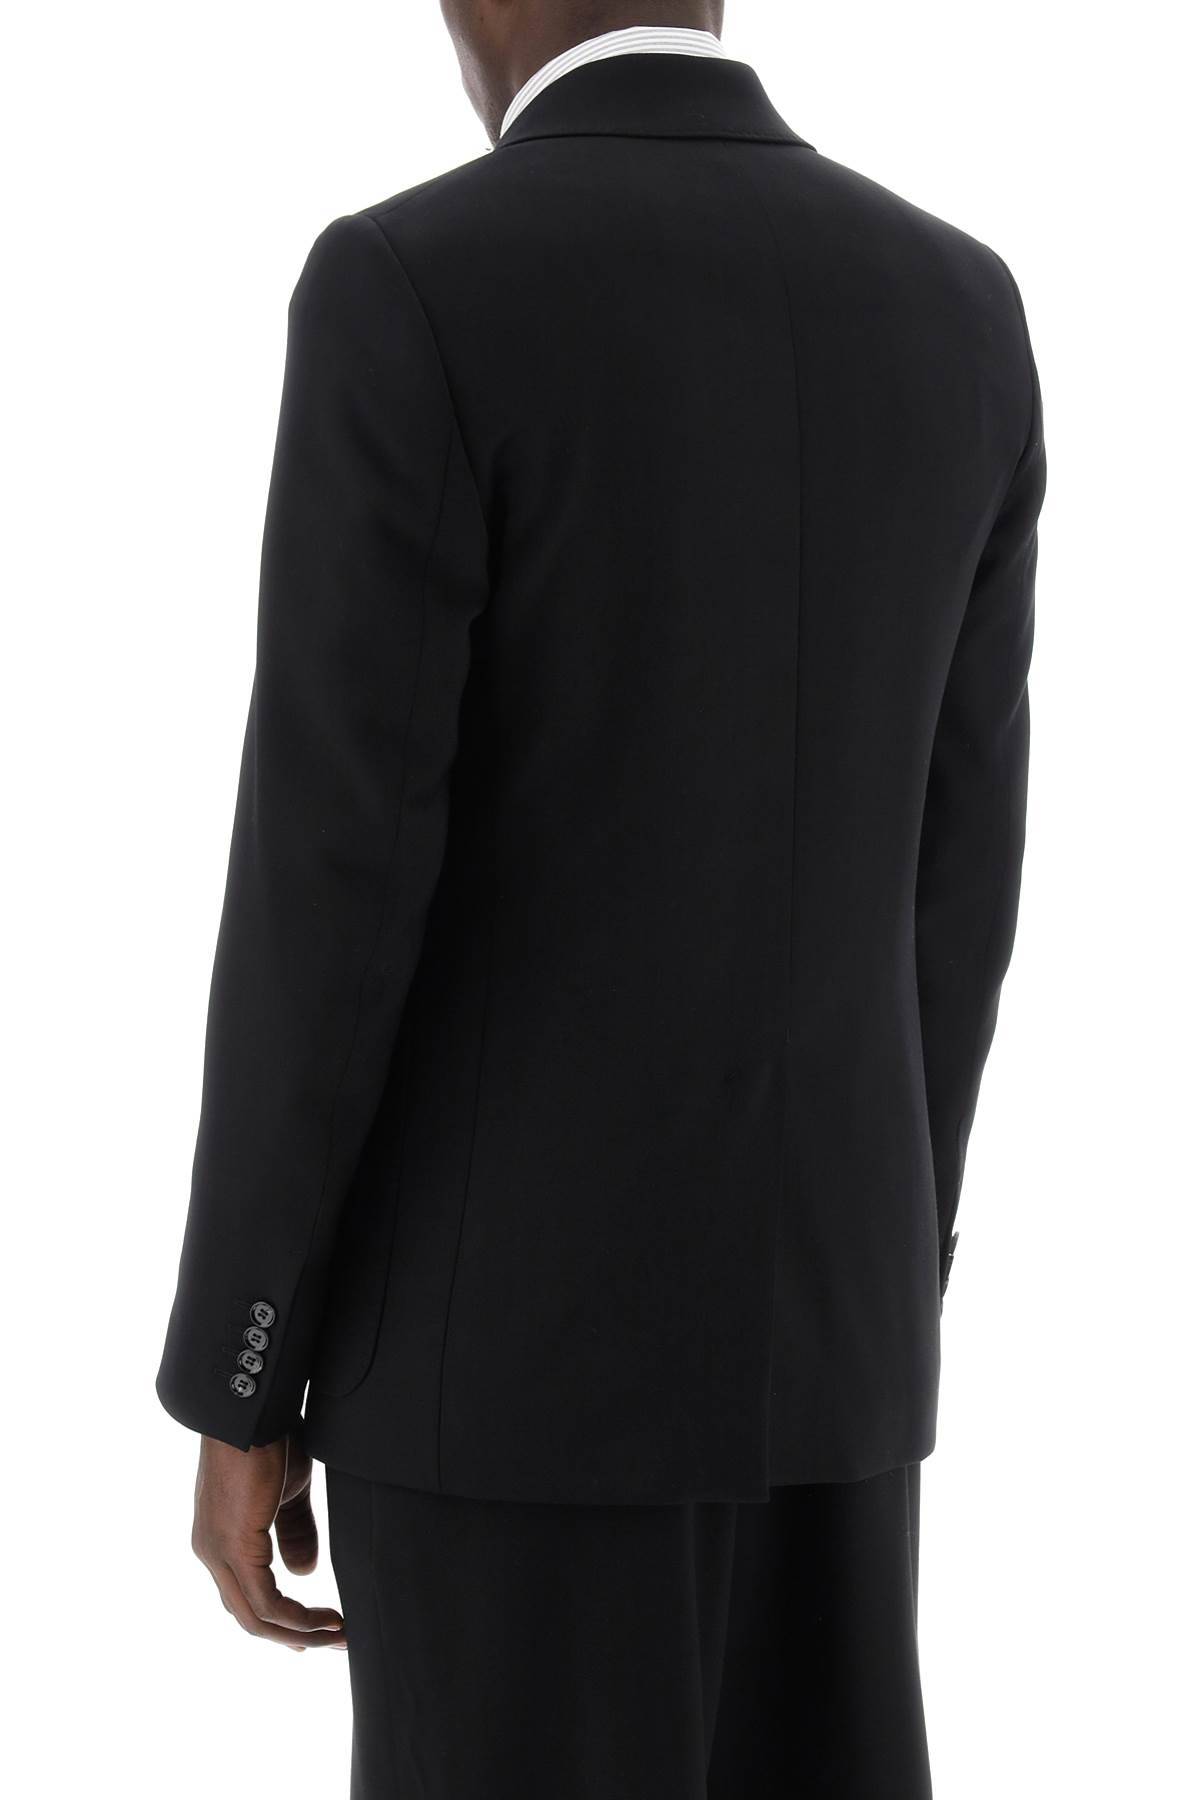 Shop Ami Alexandre Mattiussi Double-breasted Wool Jacket For Men In Black